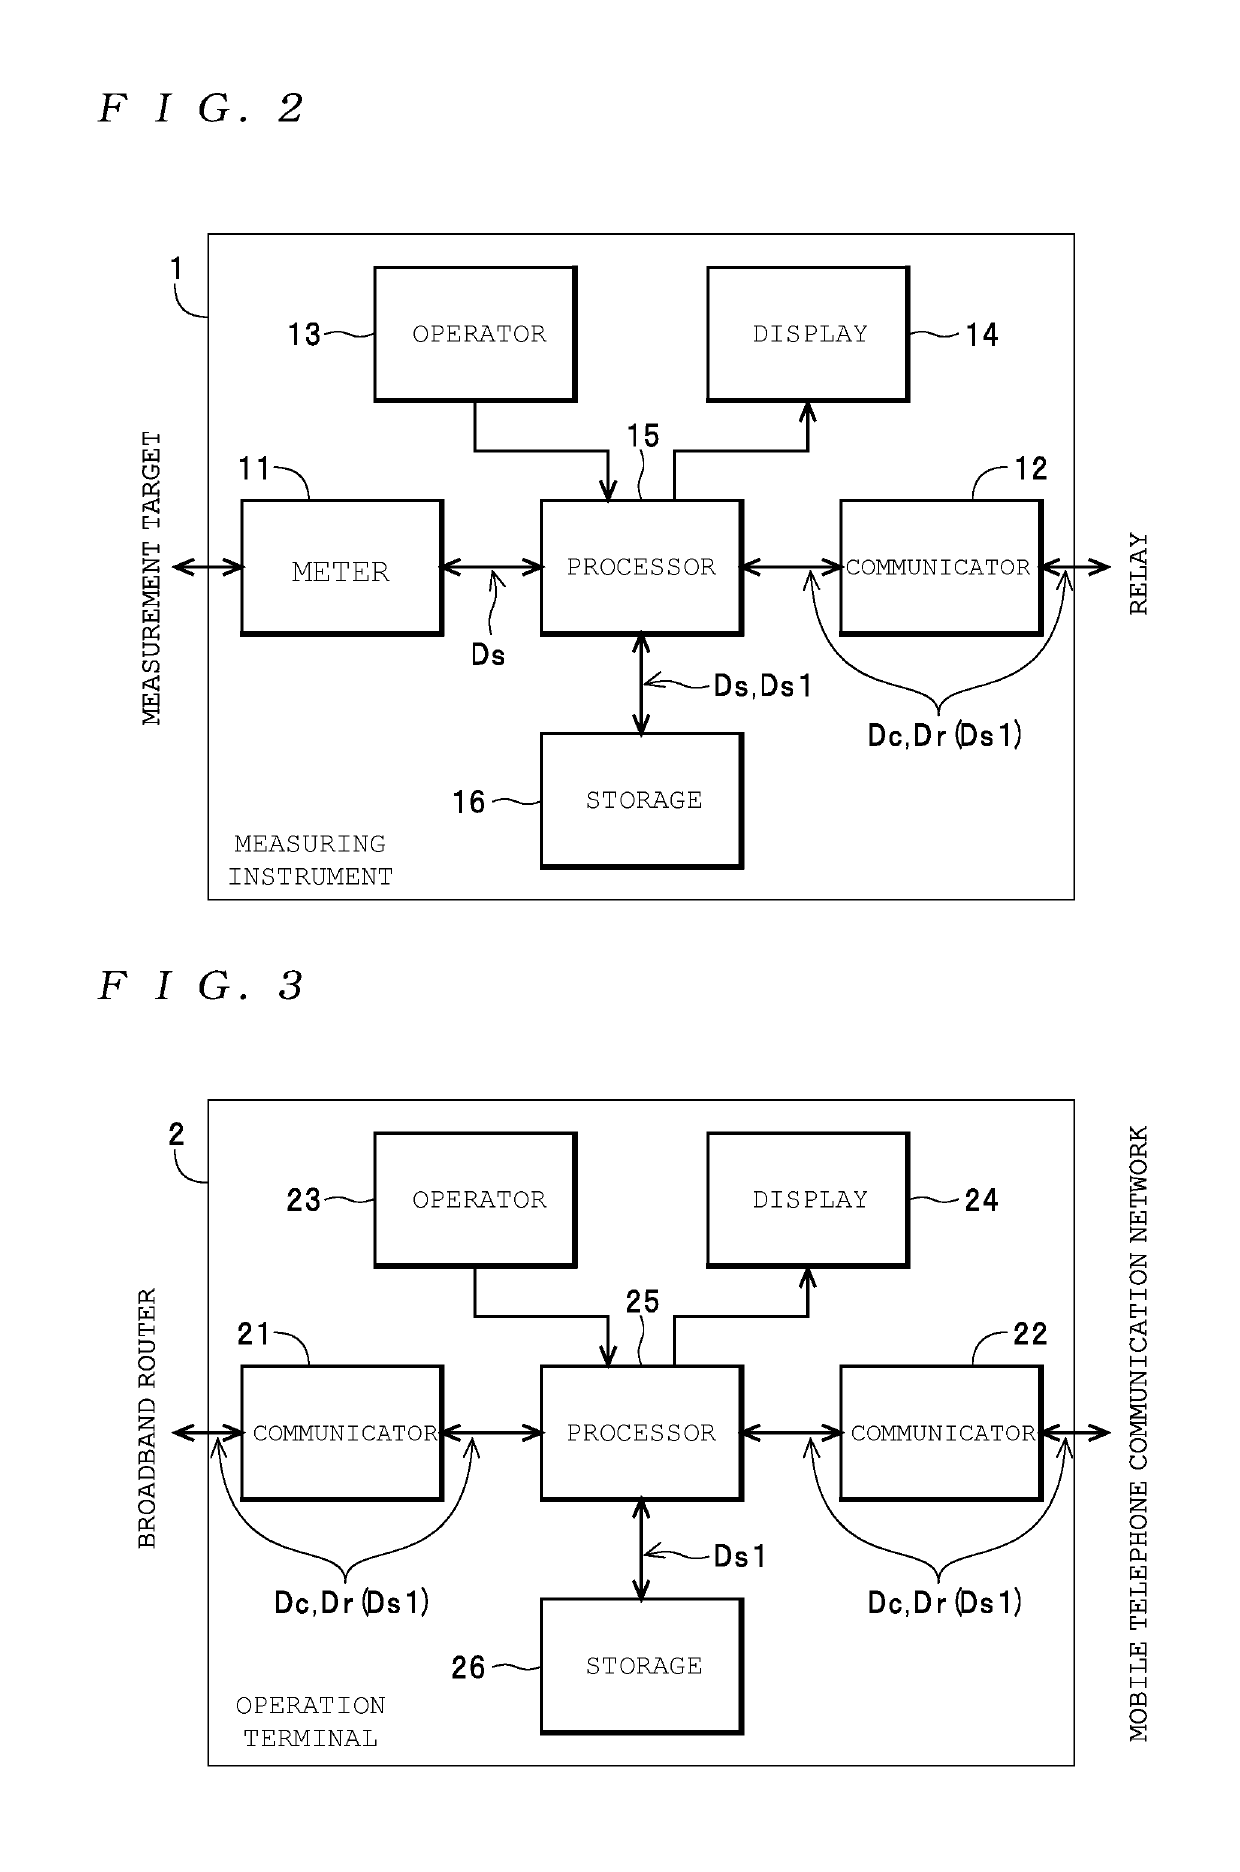 Remote operation system and measurement system